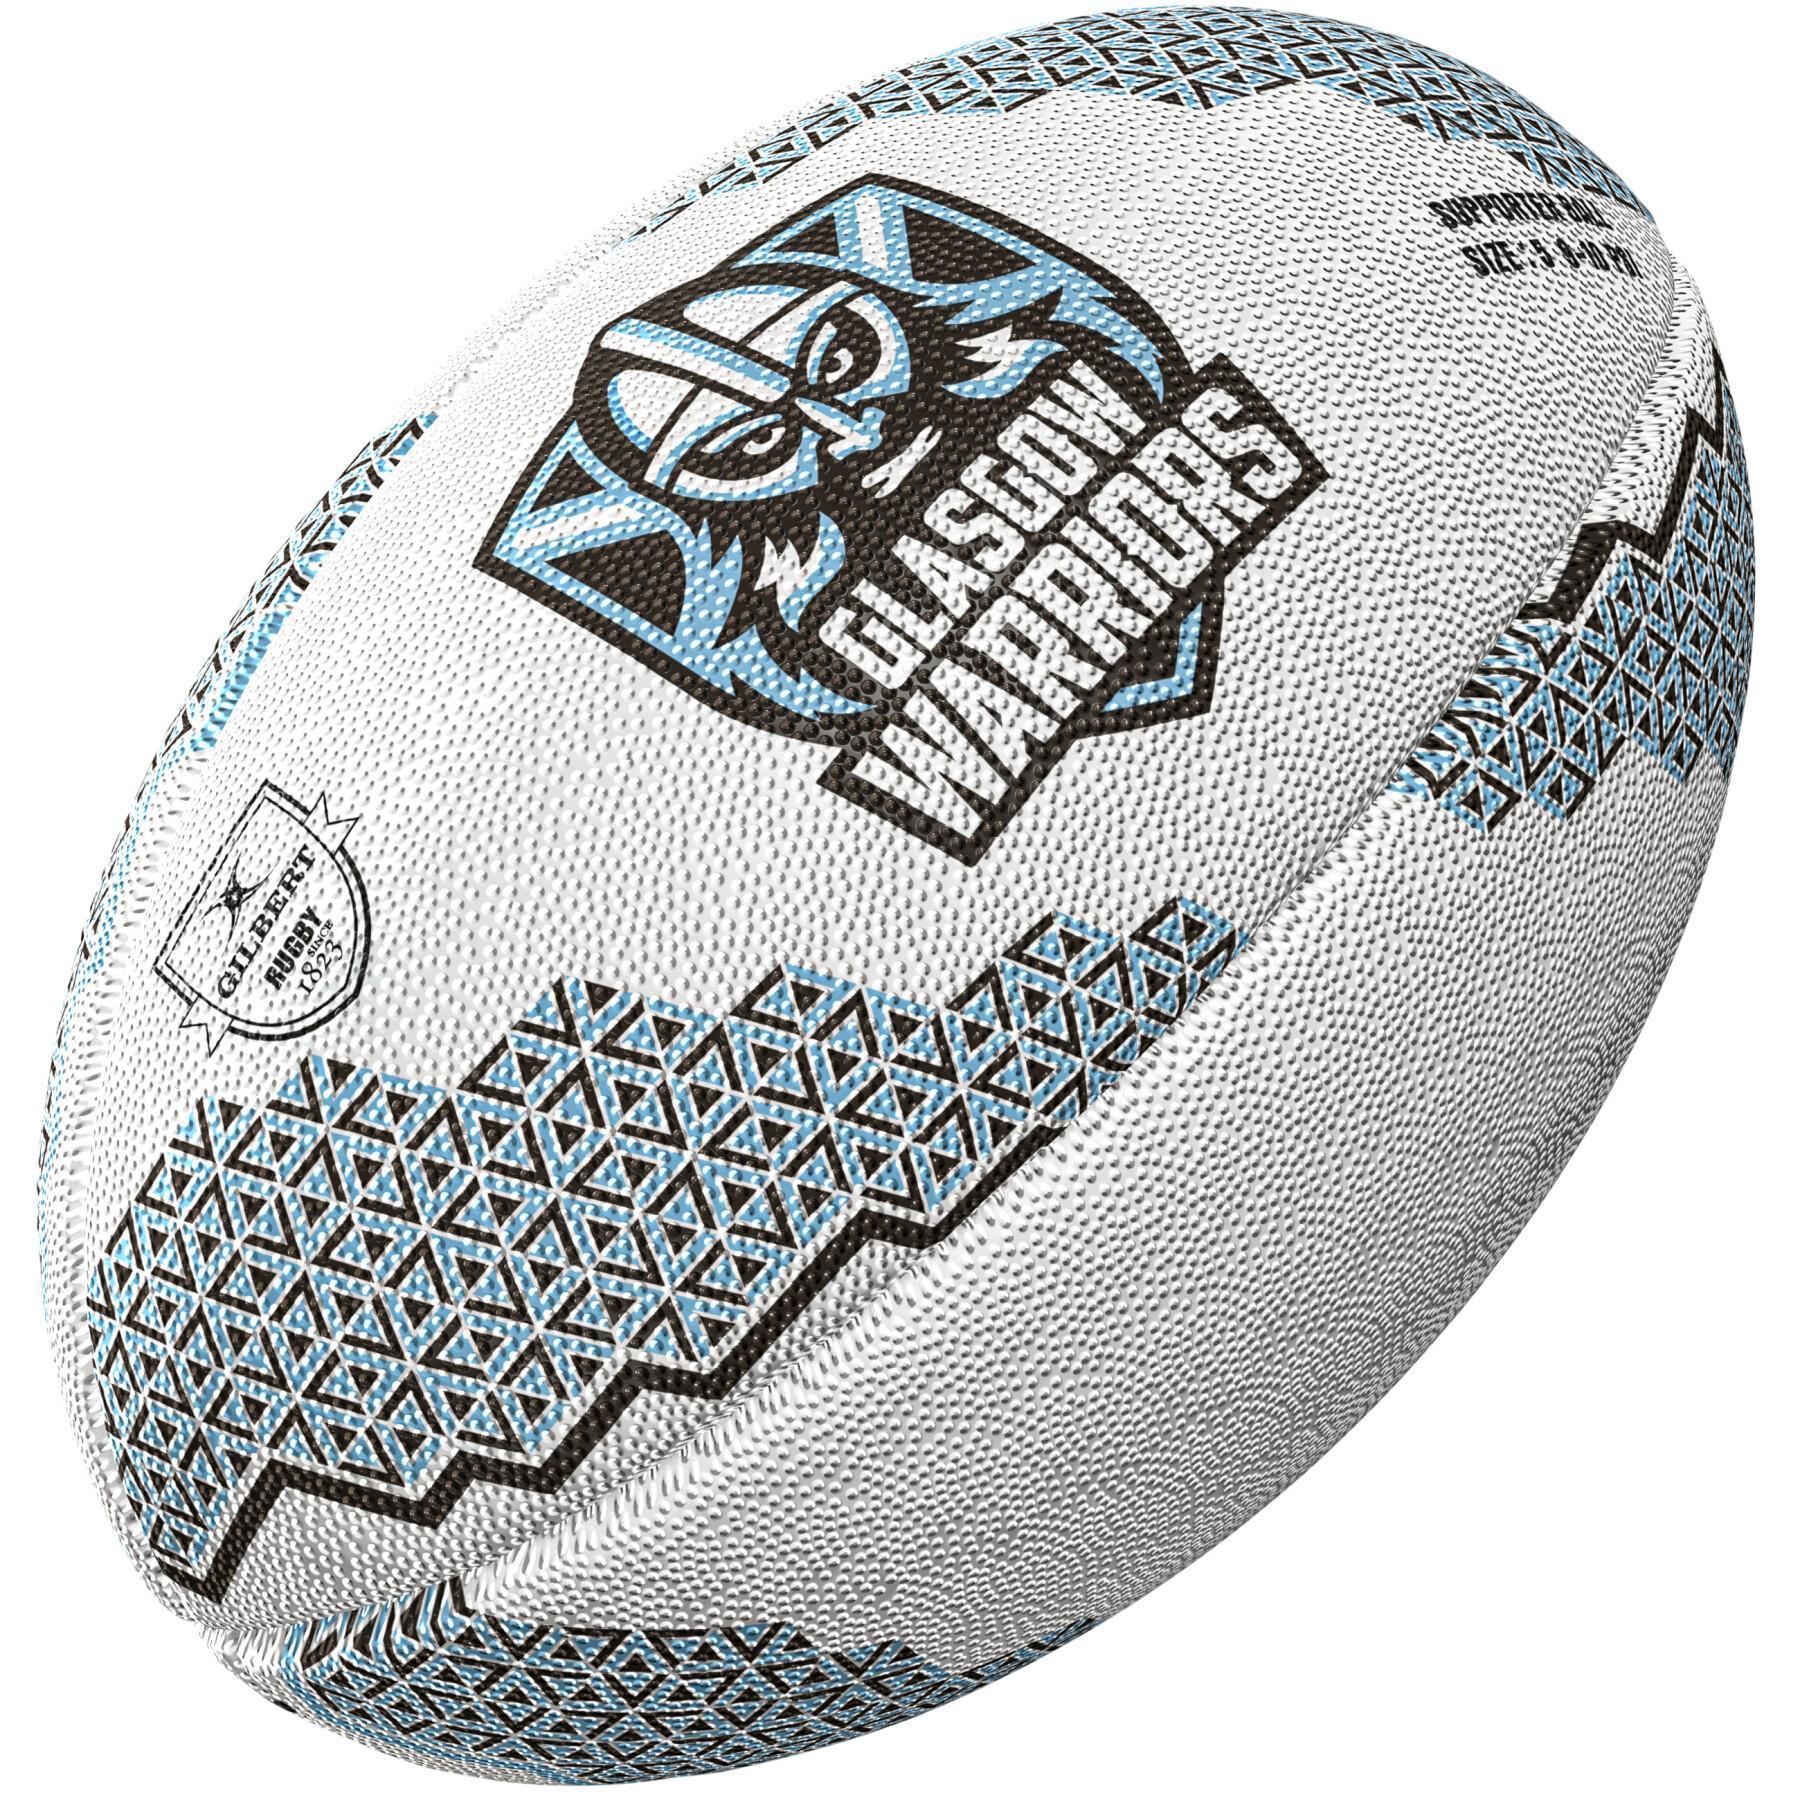 Rugby ball Glasgow Warriors Supporter